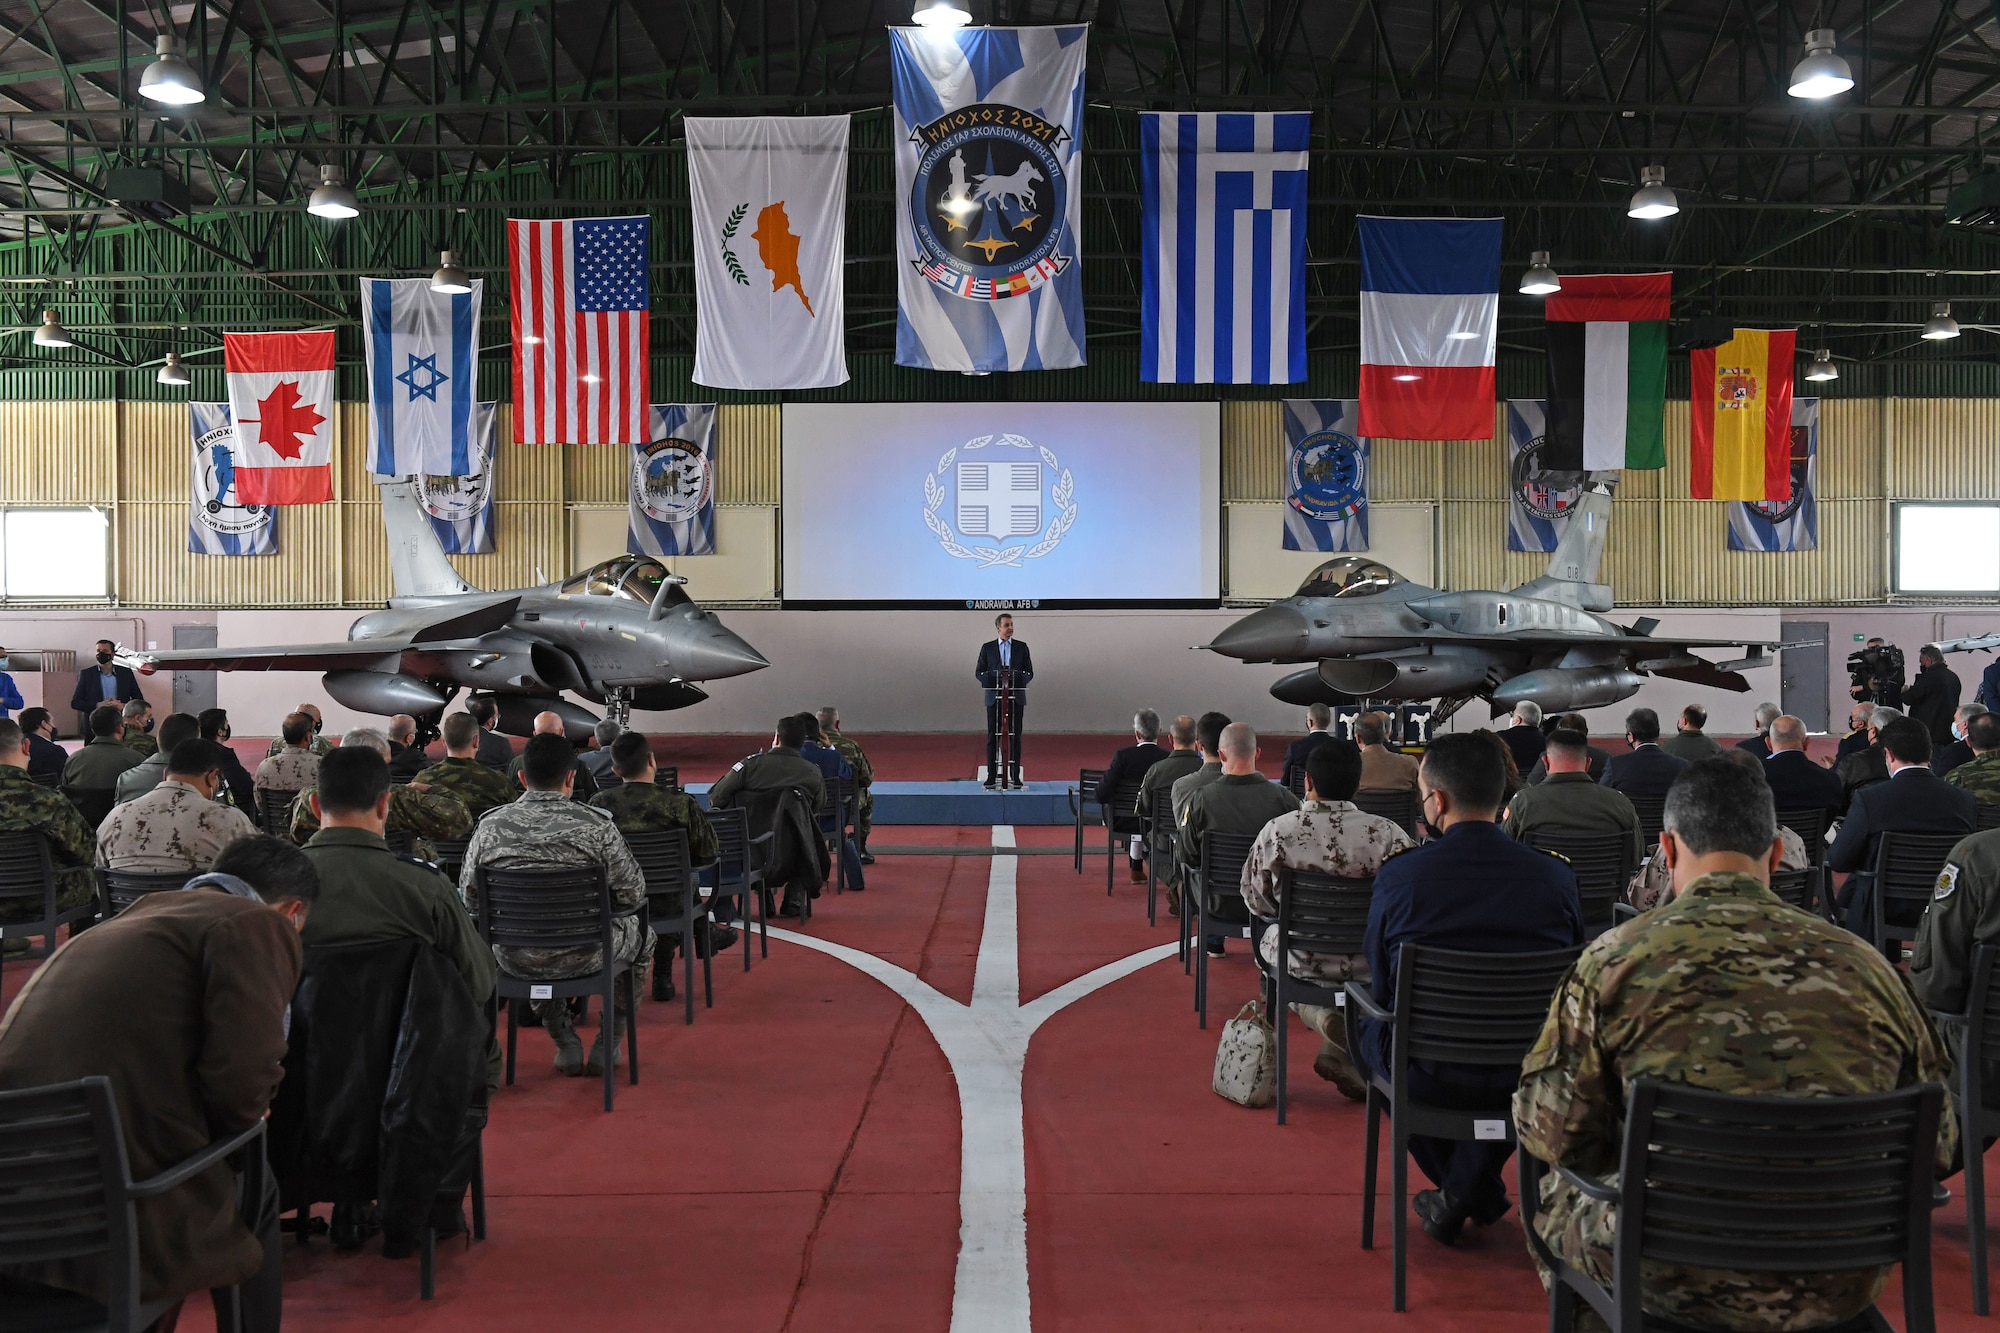 Prime Minister of Greece Kyriakos Mitsotakis, speaks to key defense leaders in the region during INIOCHOS 21 at Andravida Air Base, Greece, April 20, 2021. Along with Greek and U.S. participants, Canada, Cyprus, Israel, Slovenia, Spain and the United Arab Emirates are also supporting the exercise. The interoperability during this exercise allows various allies the opportunity to not only work together, but also the ability to learn from each other. (U.S. Air Force photo by Staff Sgt. Valerie Halbert)